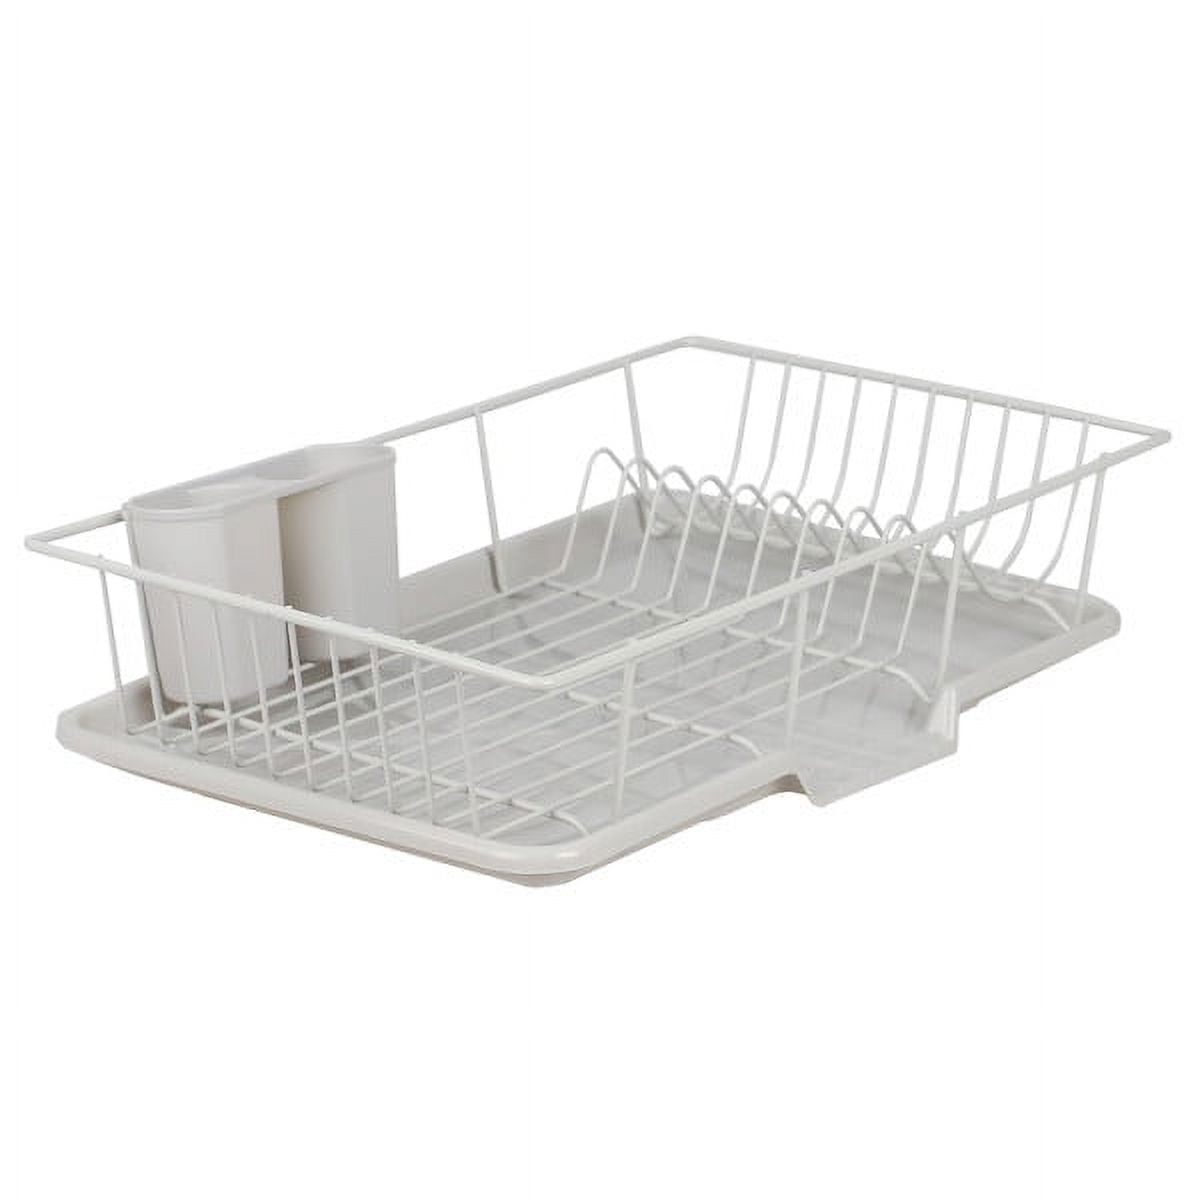 Home Basics Vinyl Dish Drainer with Self-Draining Tray, Red - 3